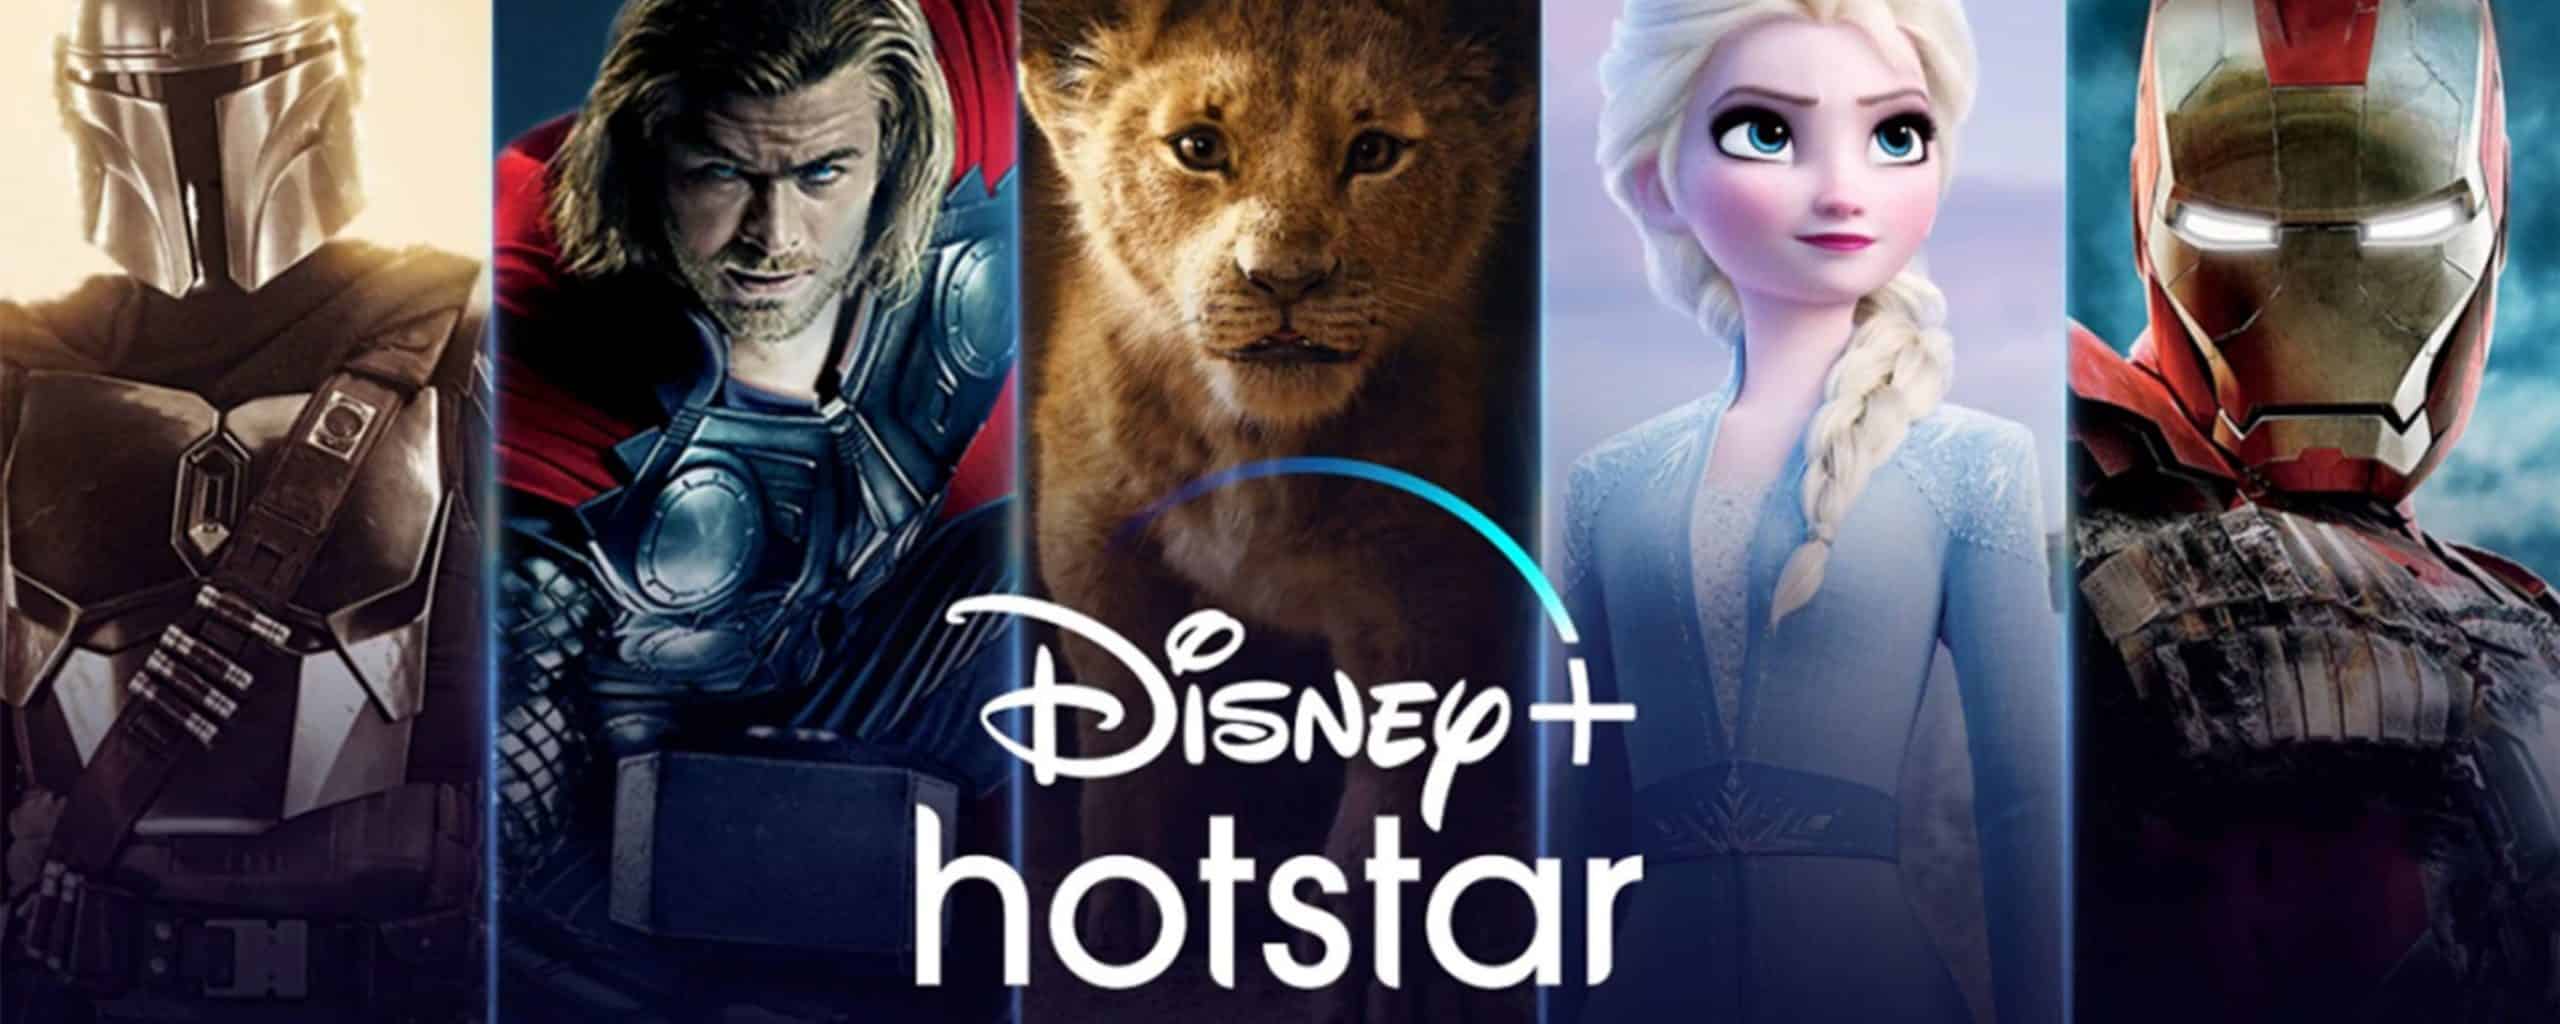 Disney Executive Explains Why They Passed On IPL Cricket Rights For Disney+ Hotstar